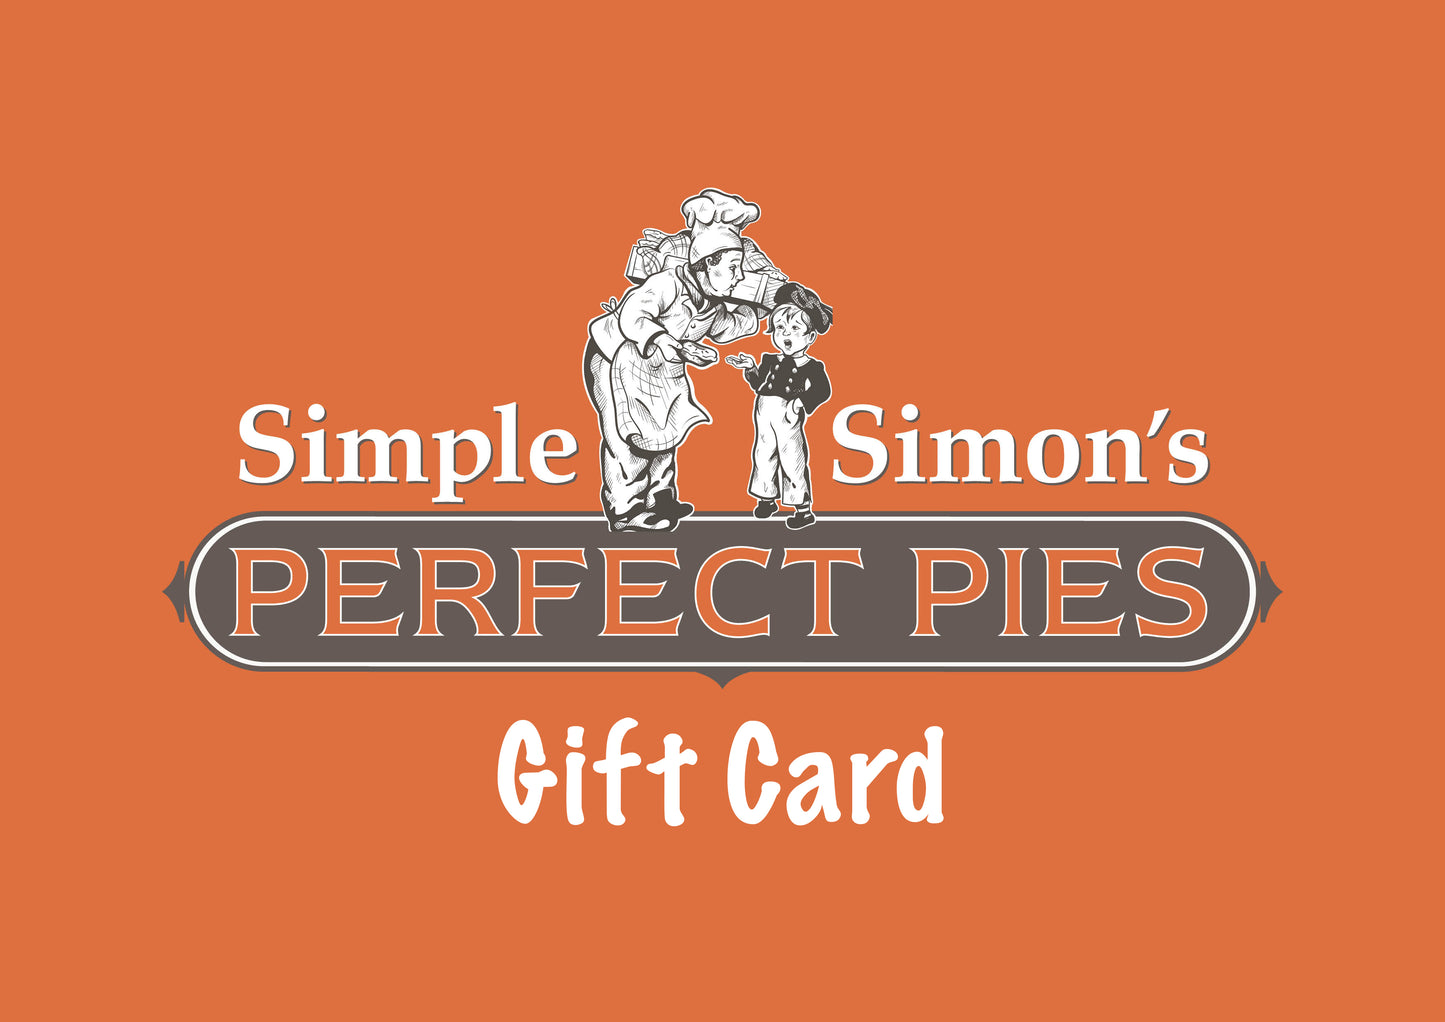 Simple Simon's Perfect Pies Gift Card